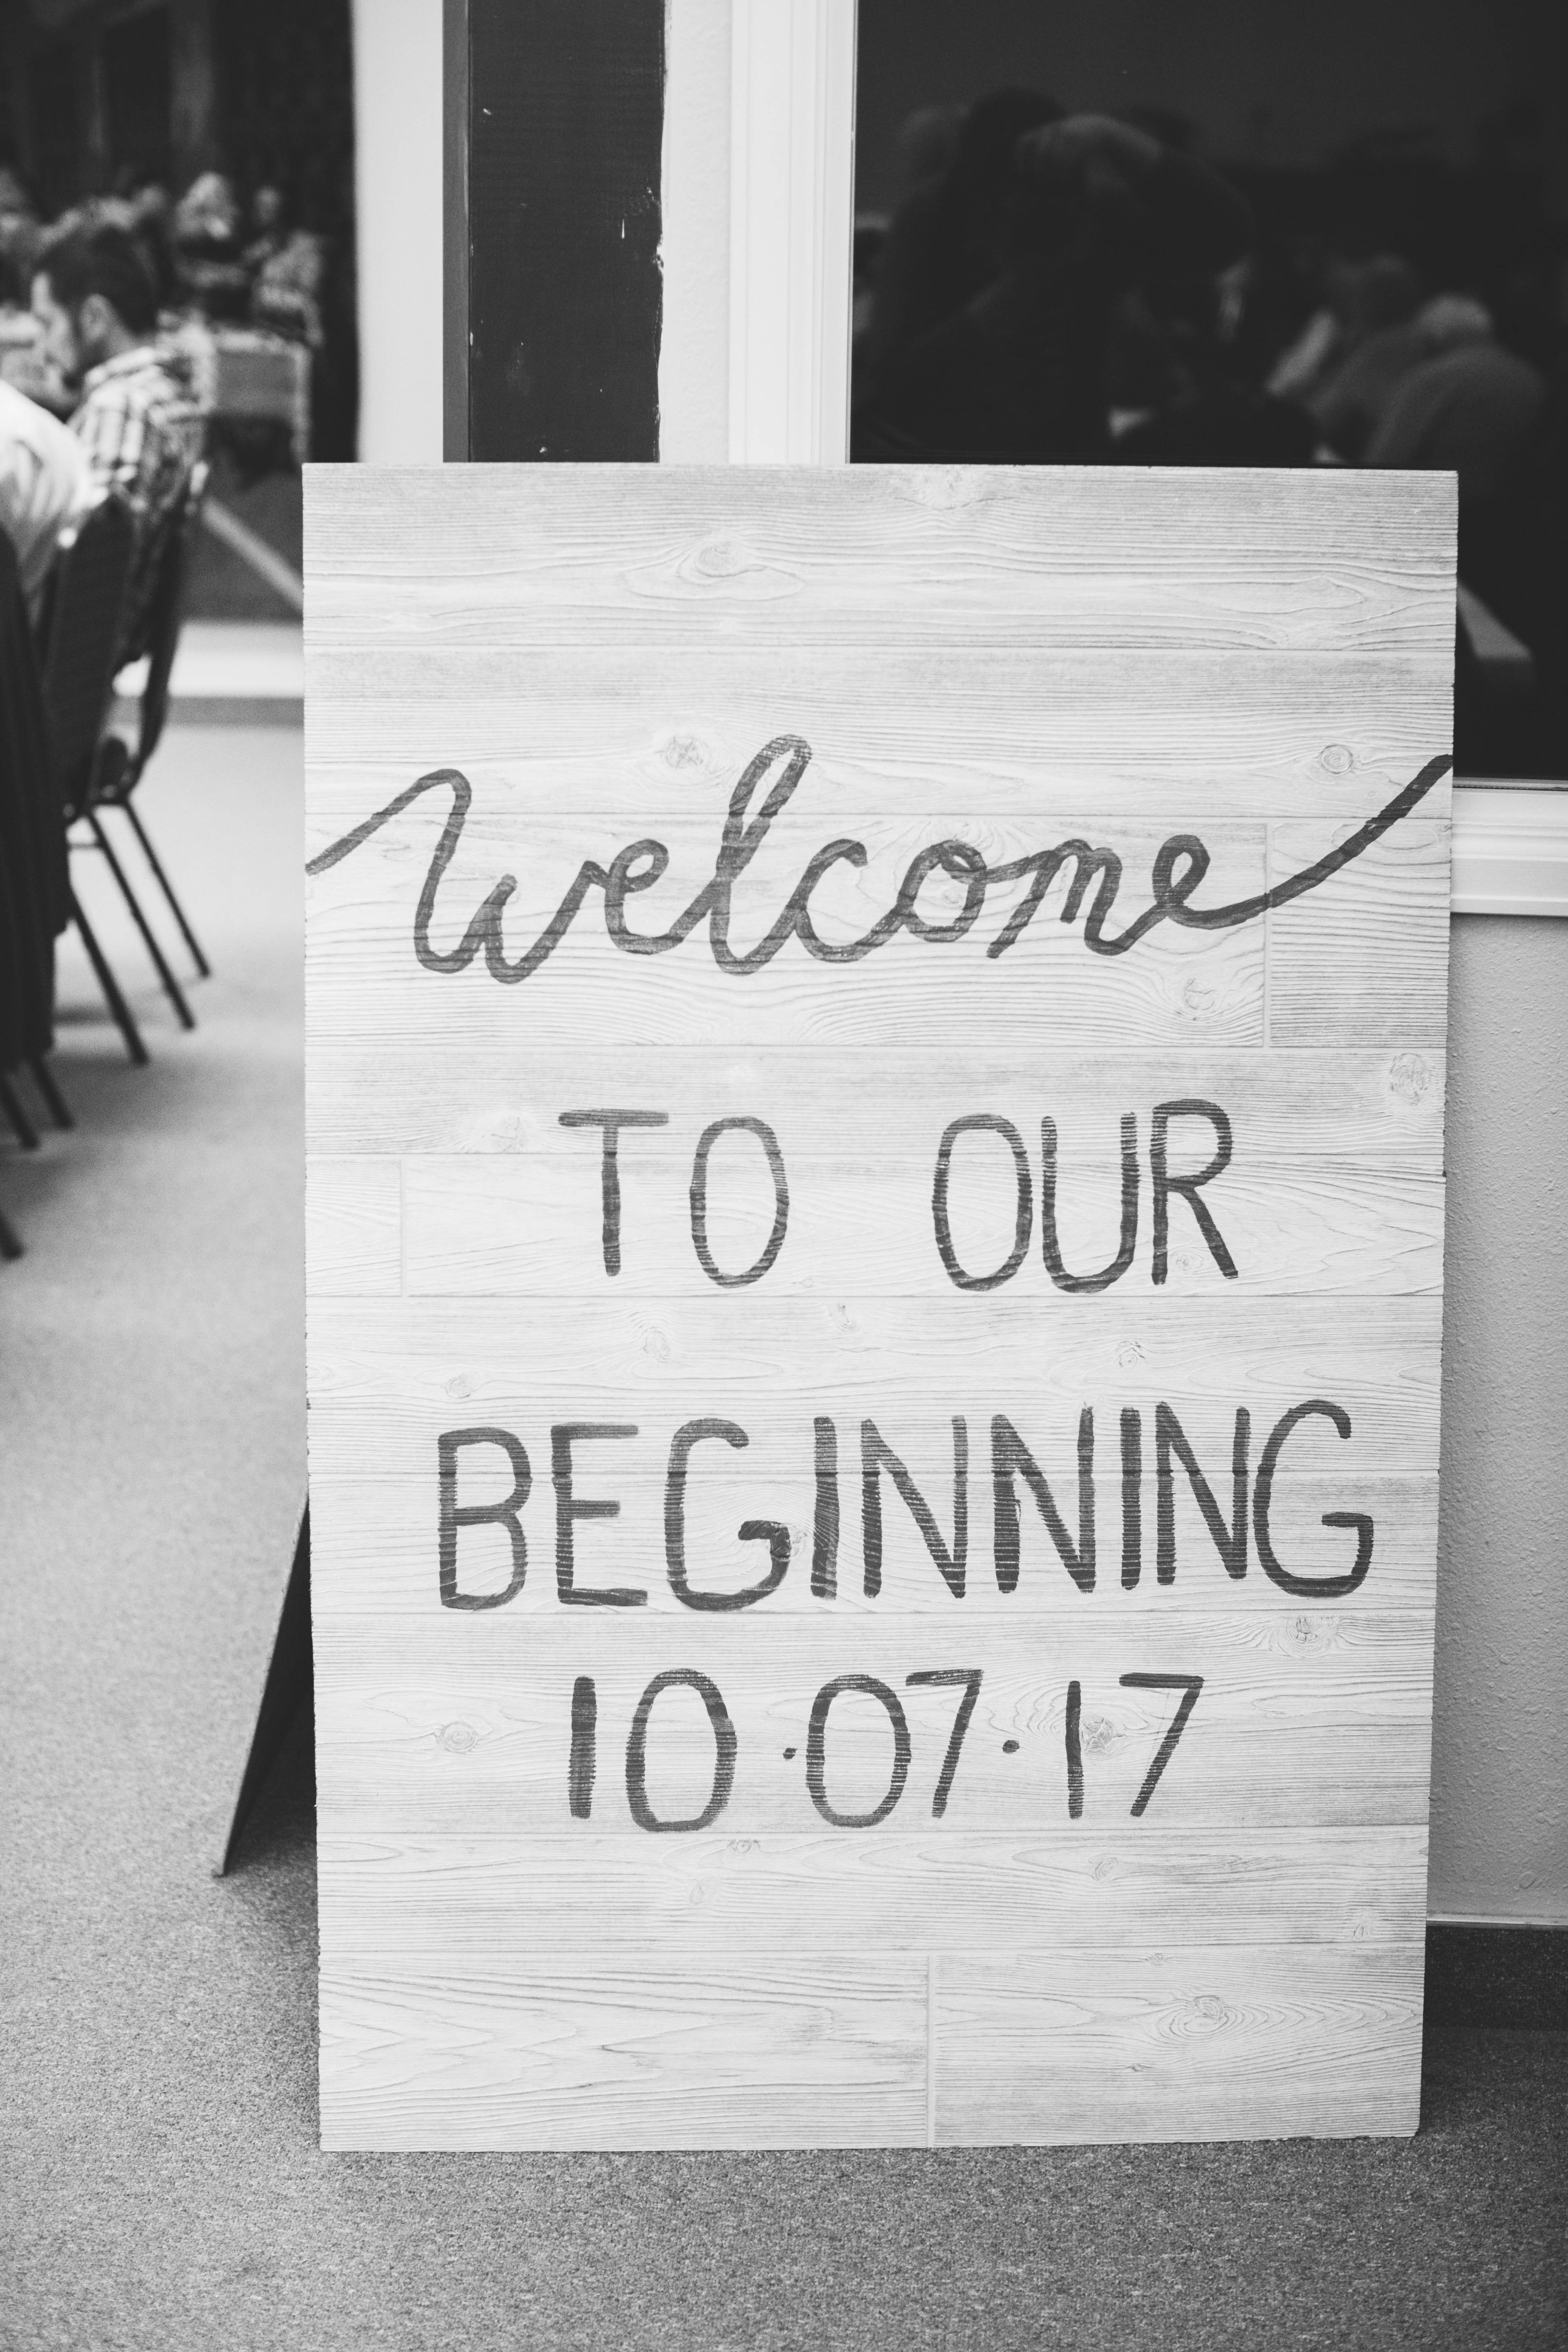 sign at a wedding reception that says "welcome to our beginning 10/07/2017"